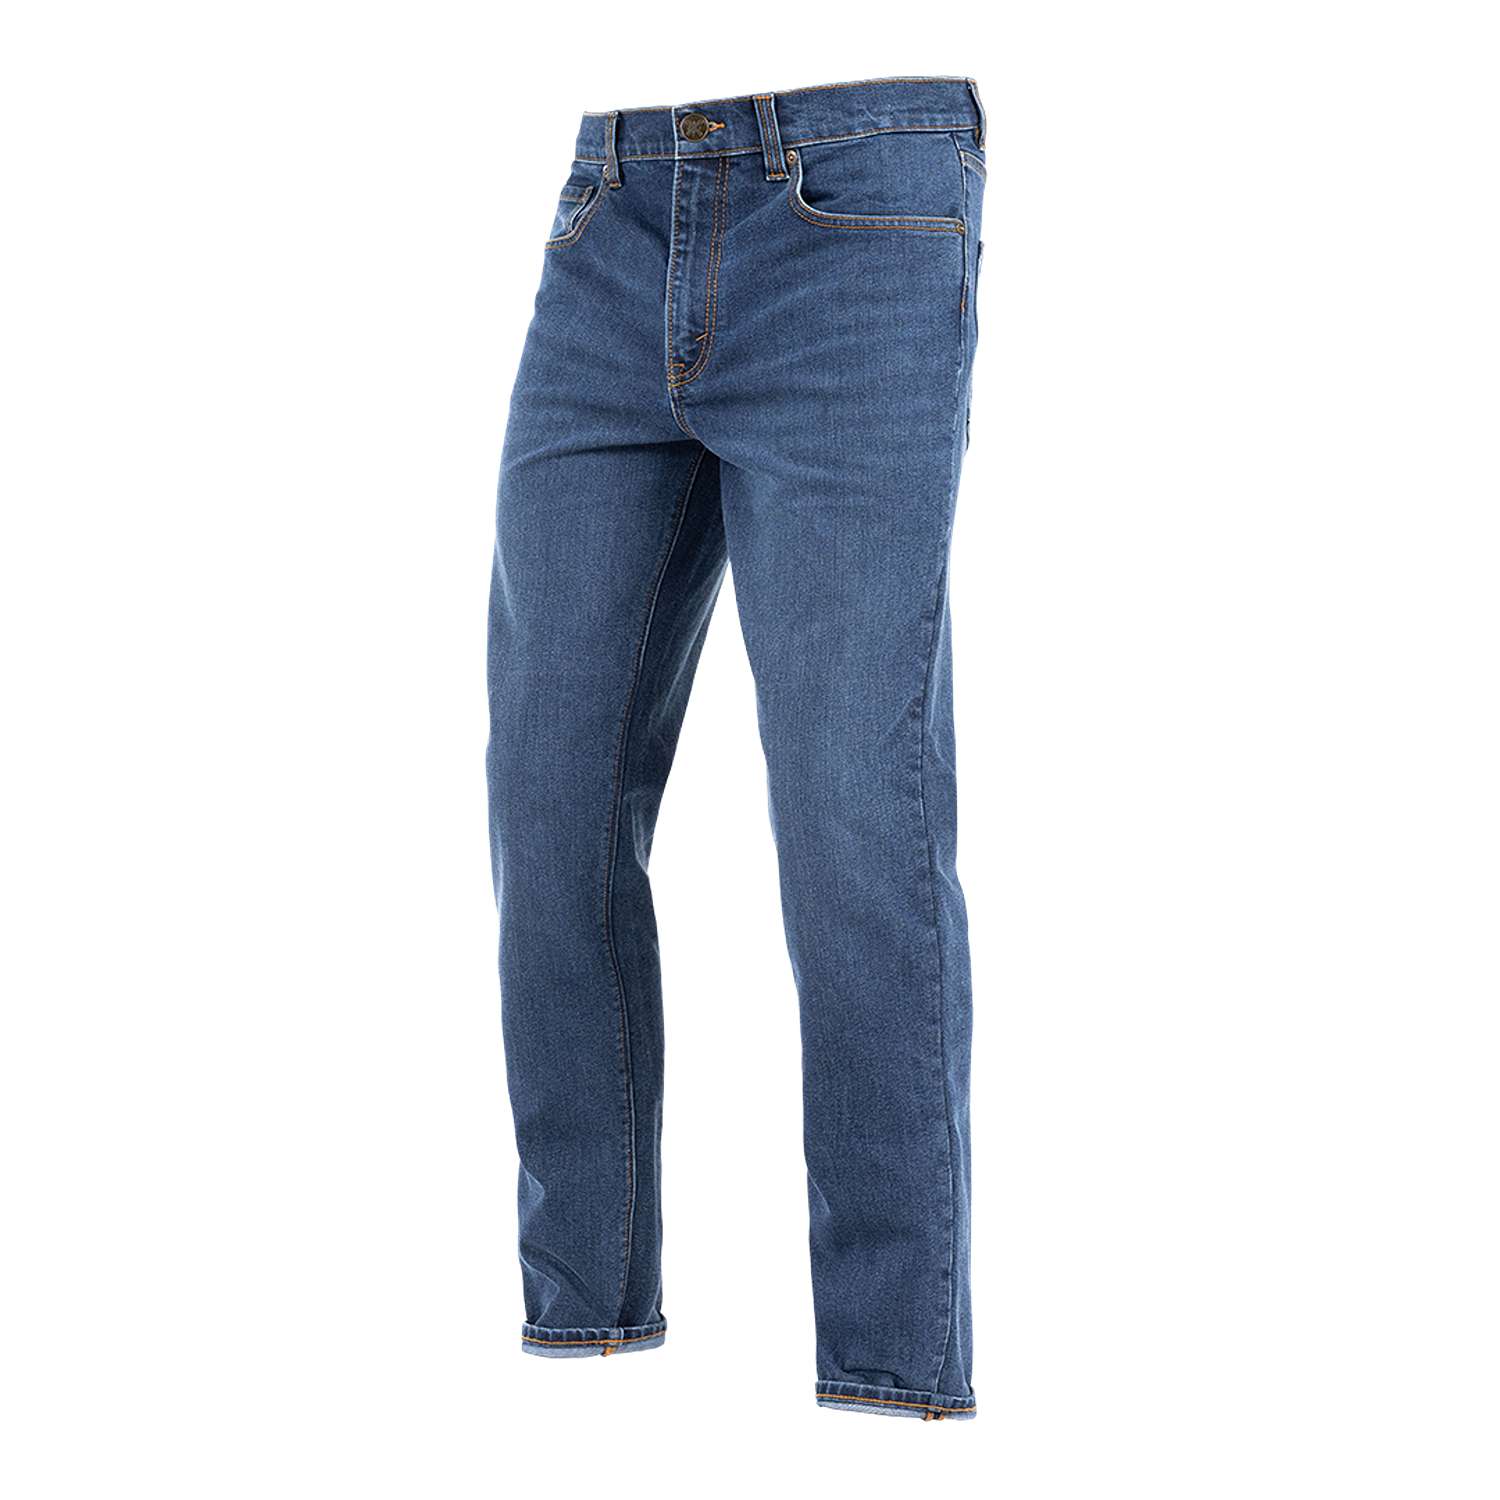 Image of John Doe Classic Tapered Jeans Indigo Taille W32/L34